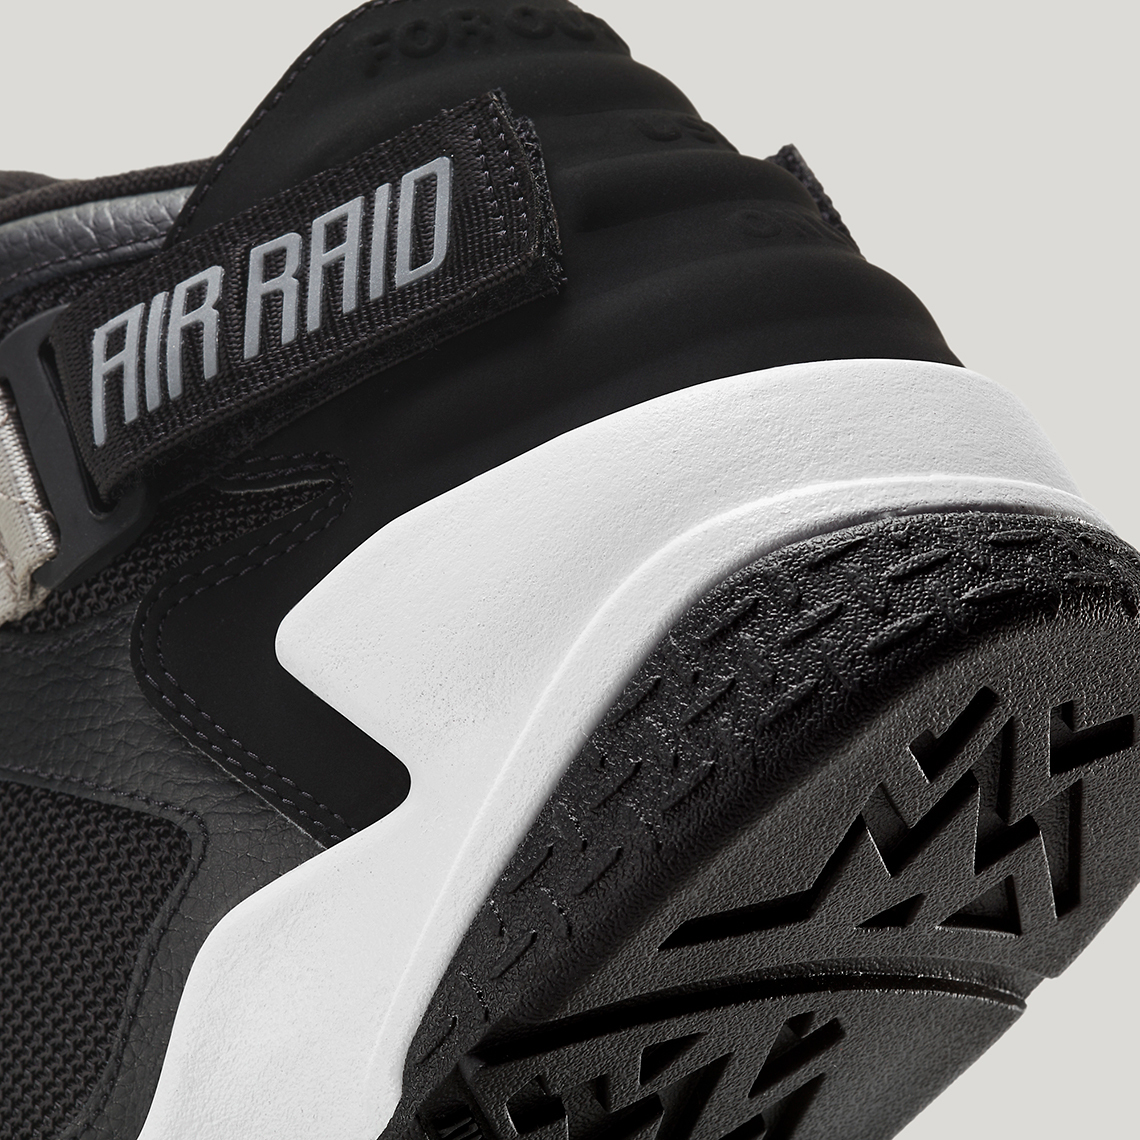 The OG Nike Air Raid Is Coming Back In 2020